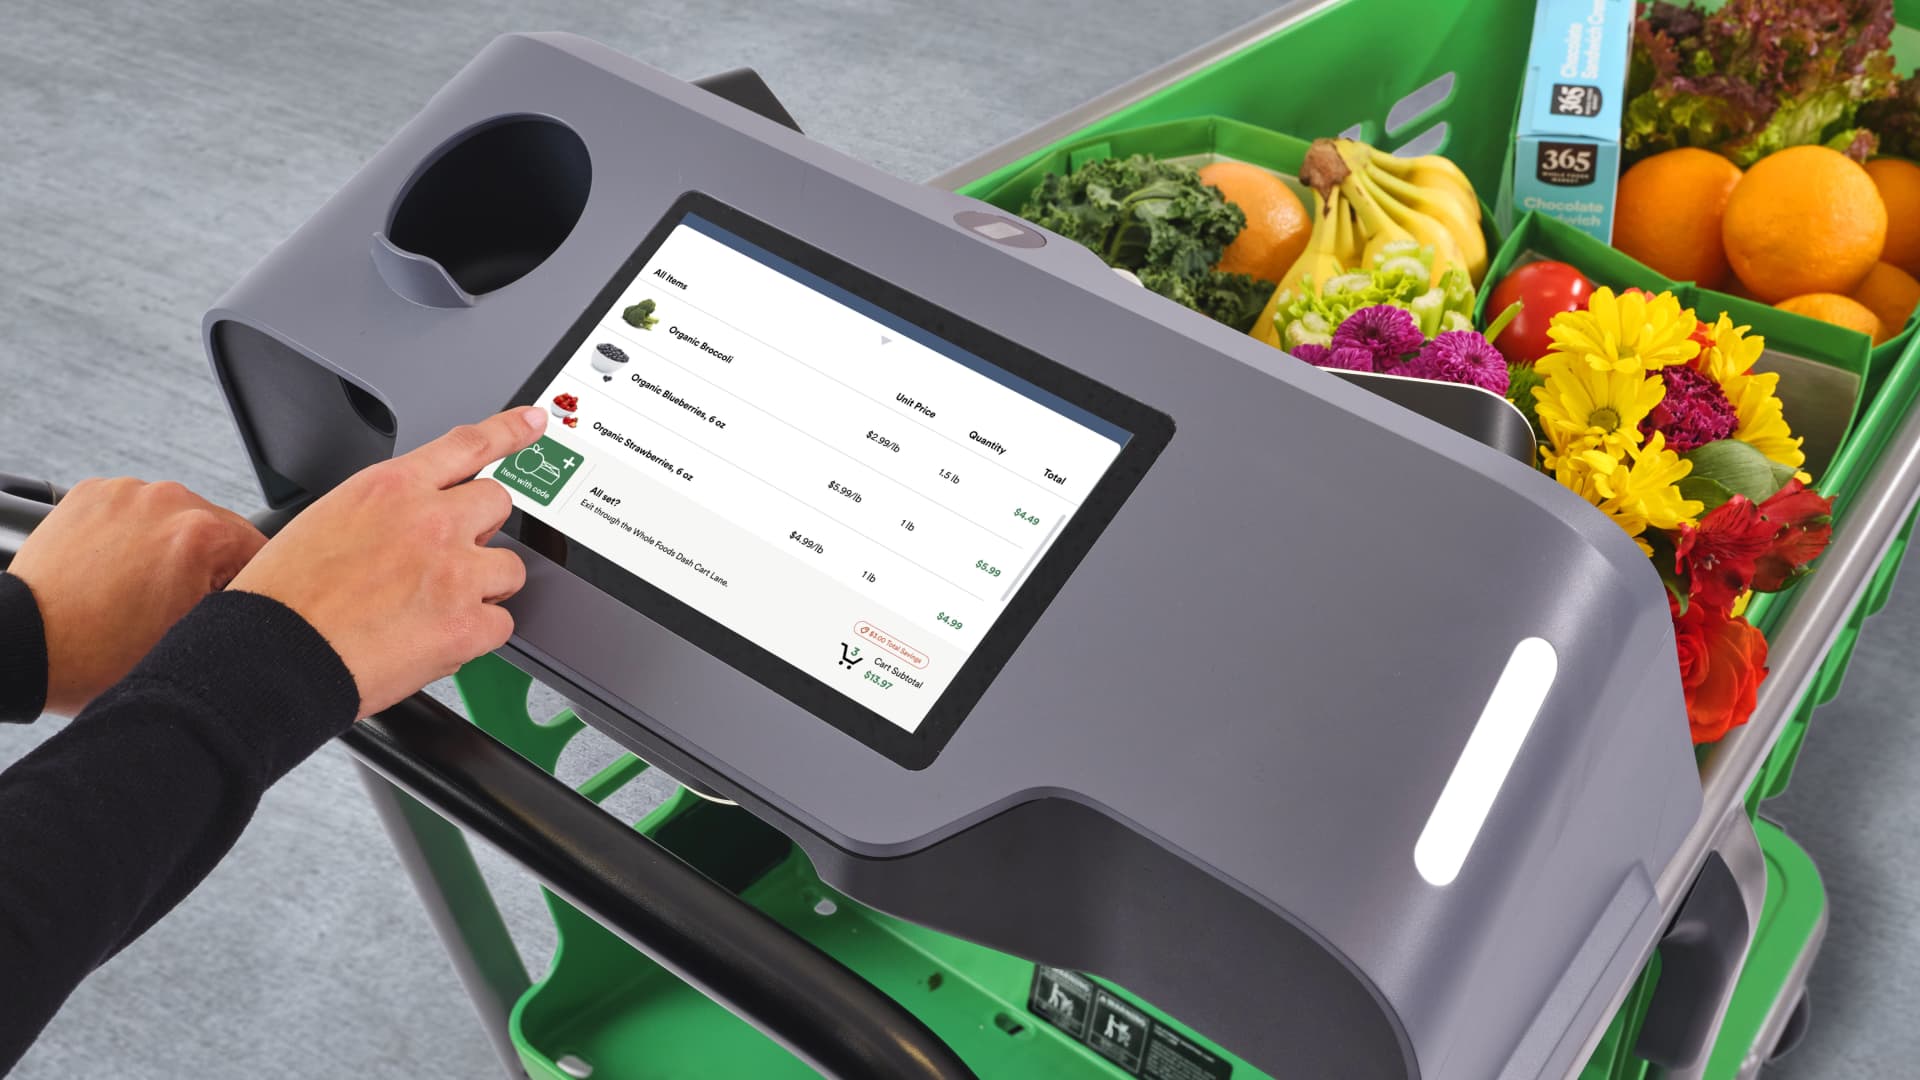 Amazon's smart grocery carts are coming to some Whole Foods stores